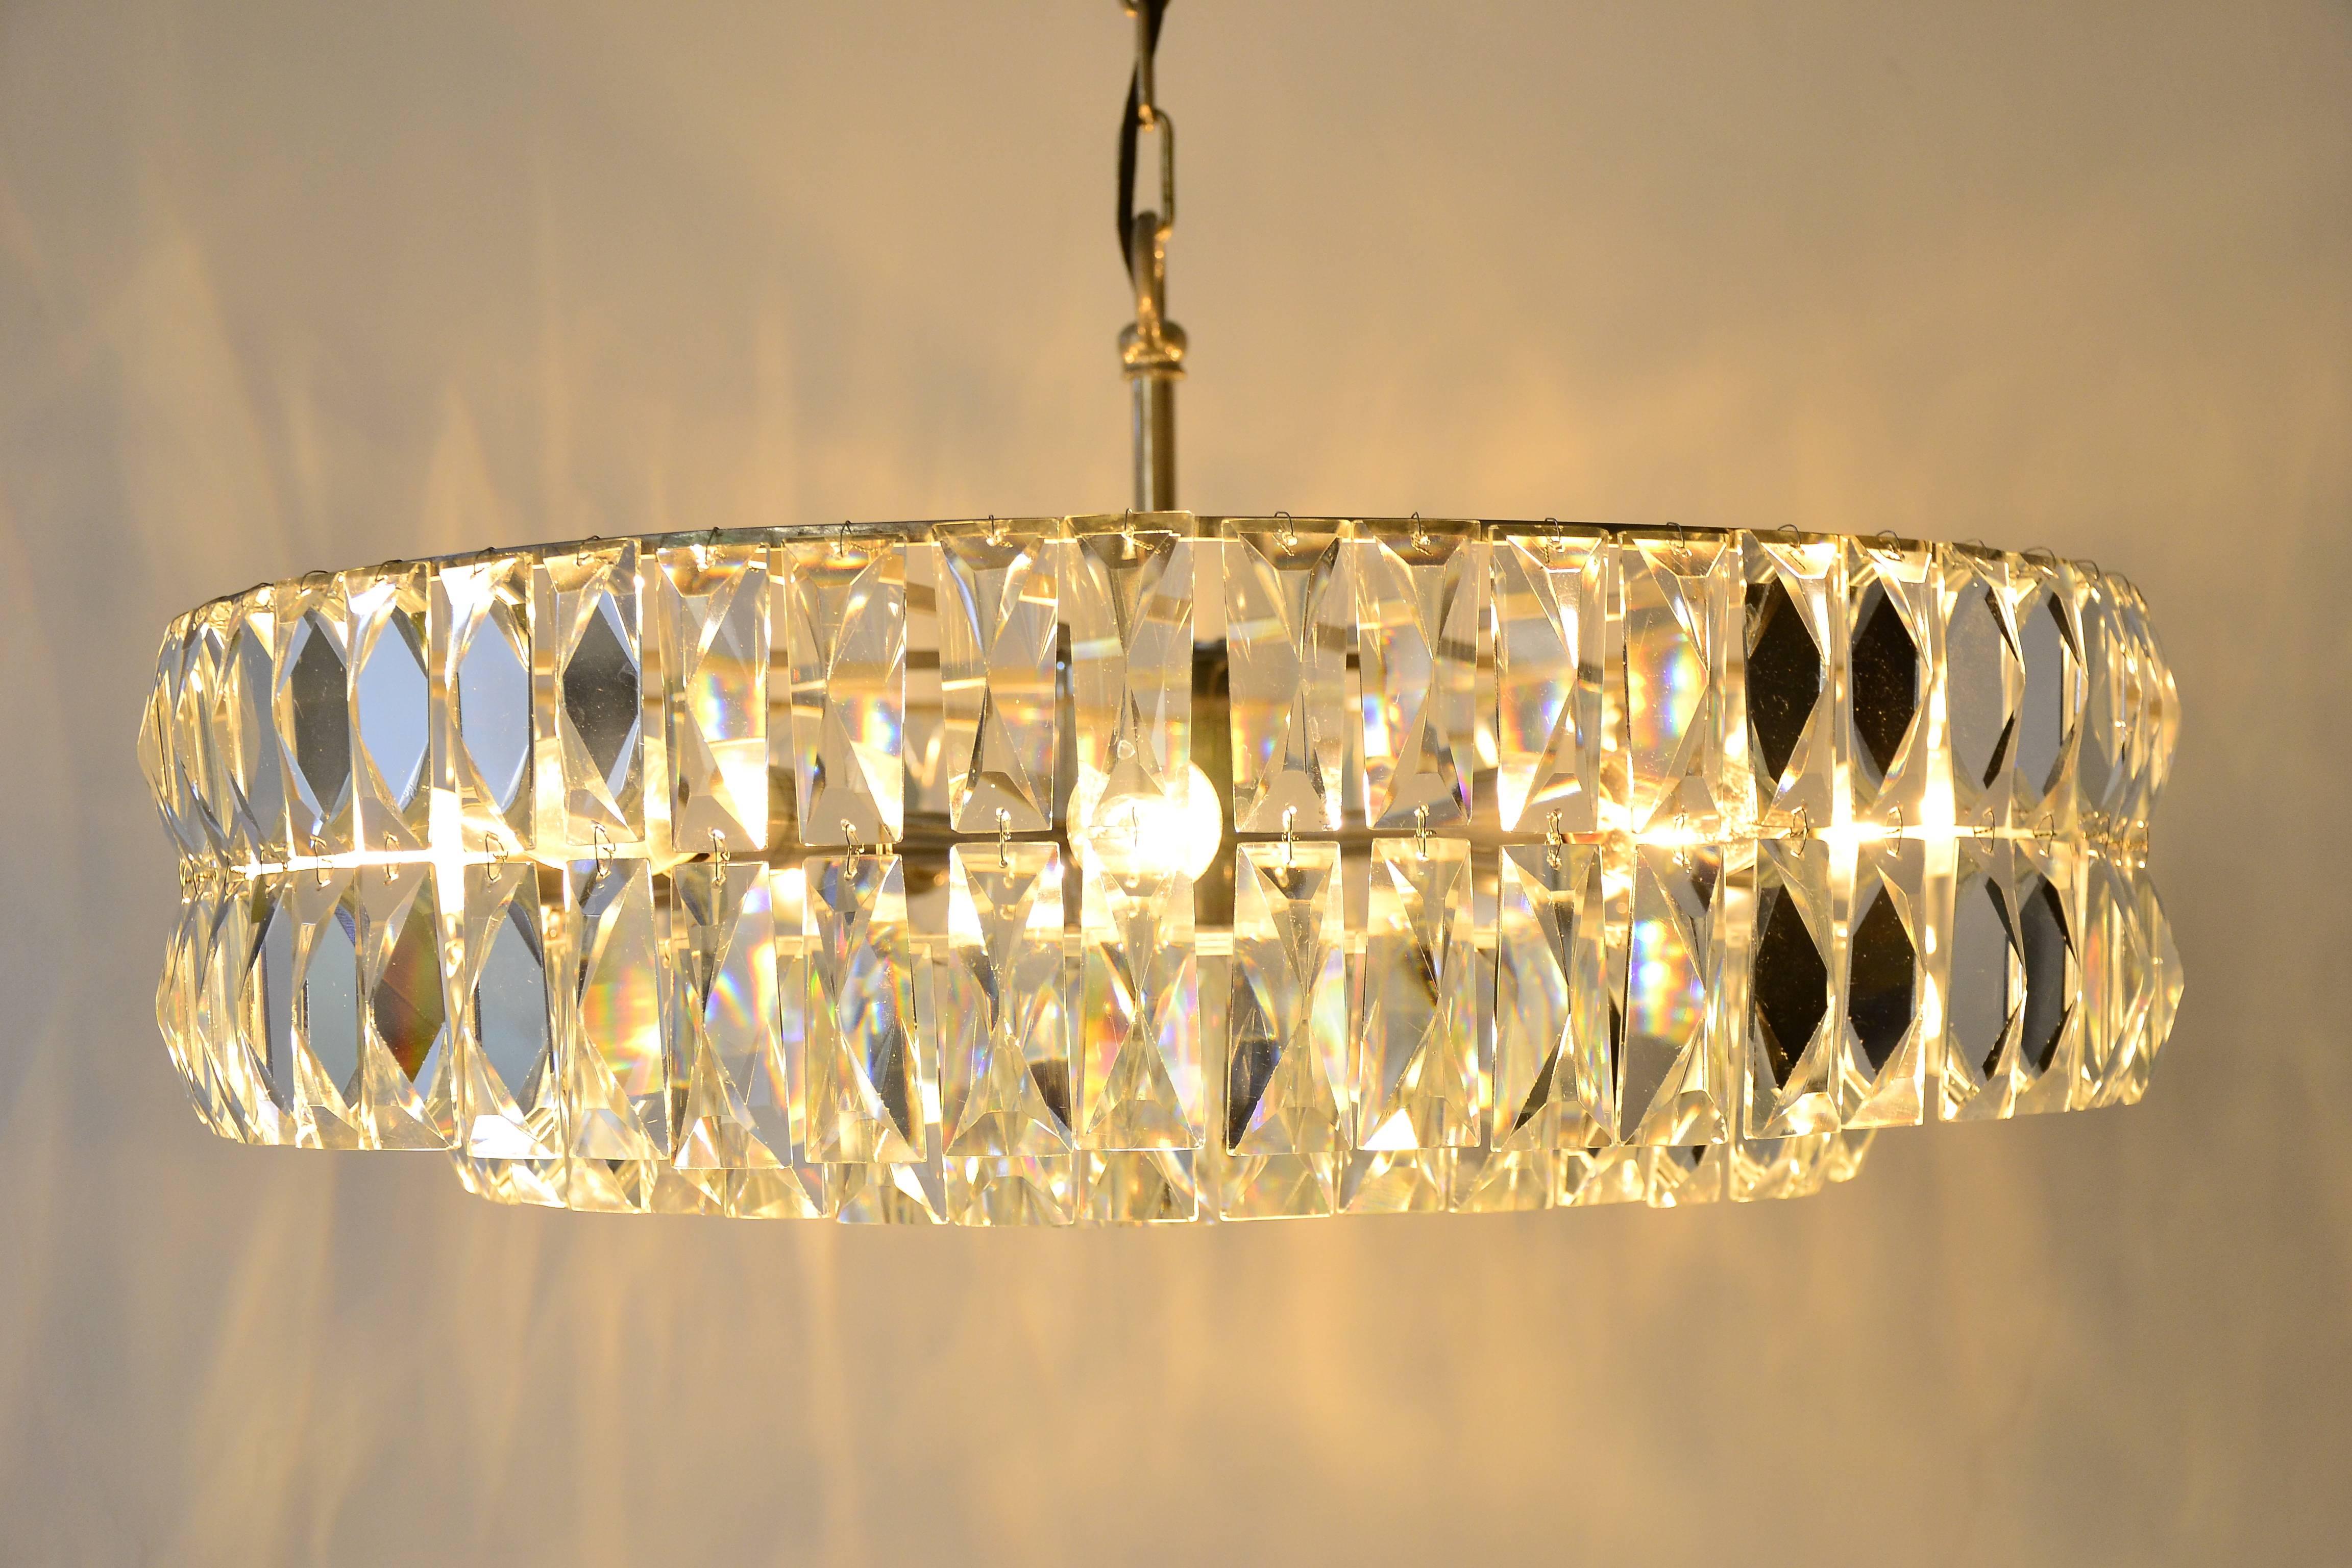 Crystal chandelier by Bakalowits & Sohne, Austria, 1960s.
Ten bulbs.
The height of the chandelier is easily adjustable to fit different rooms.
Original condition.